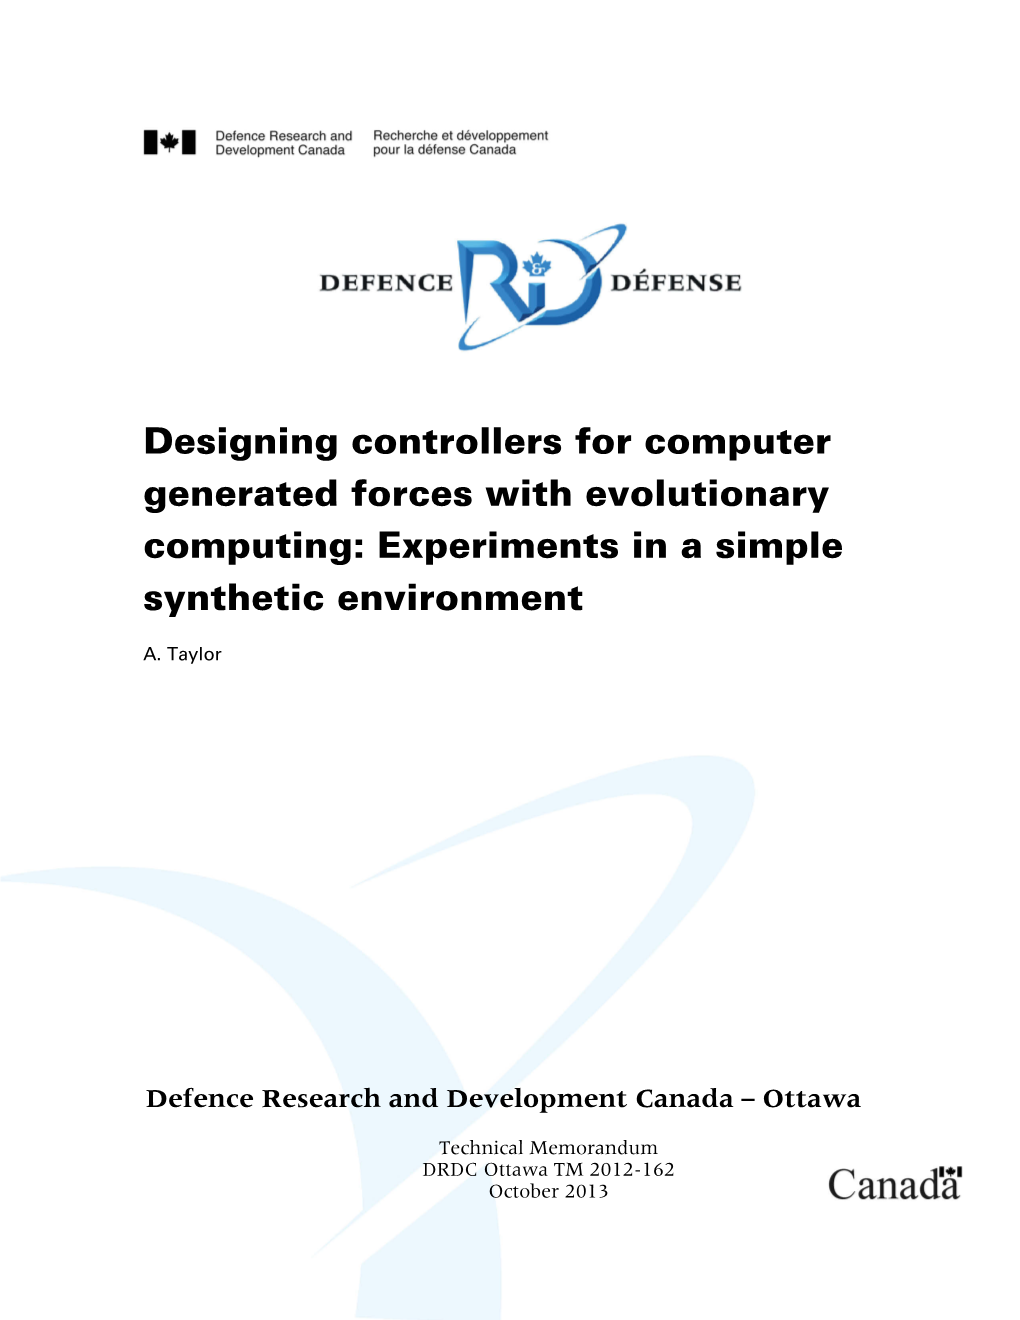 Designing Controllers for Computer Generated Forces with Evolutionary Computing: Experiments in a Simple Synthetic Environment